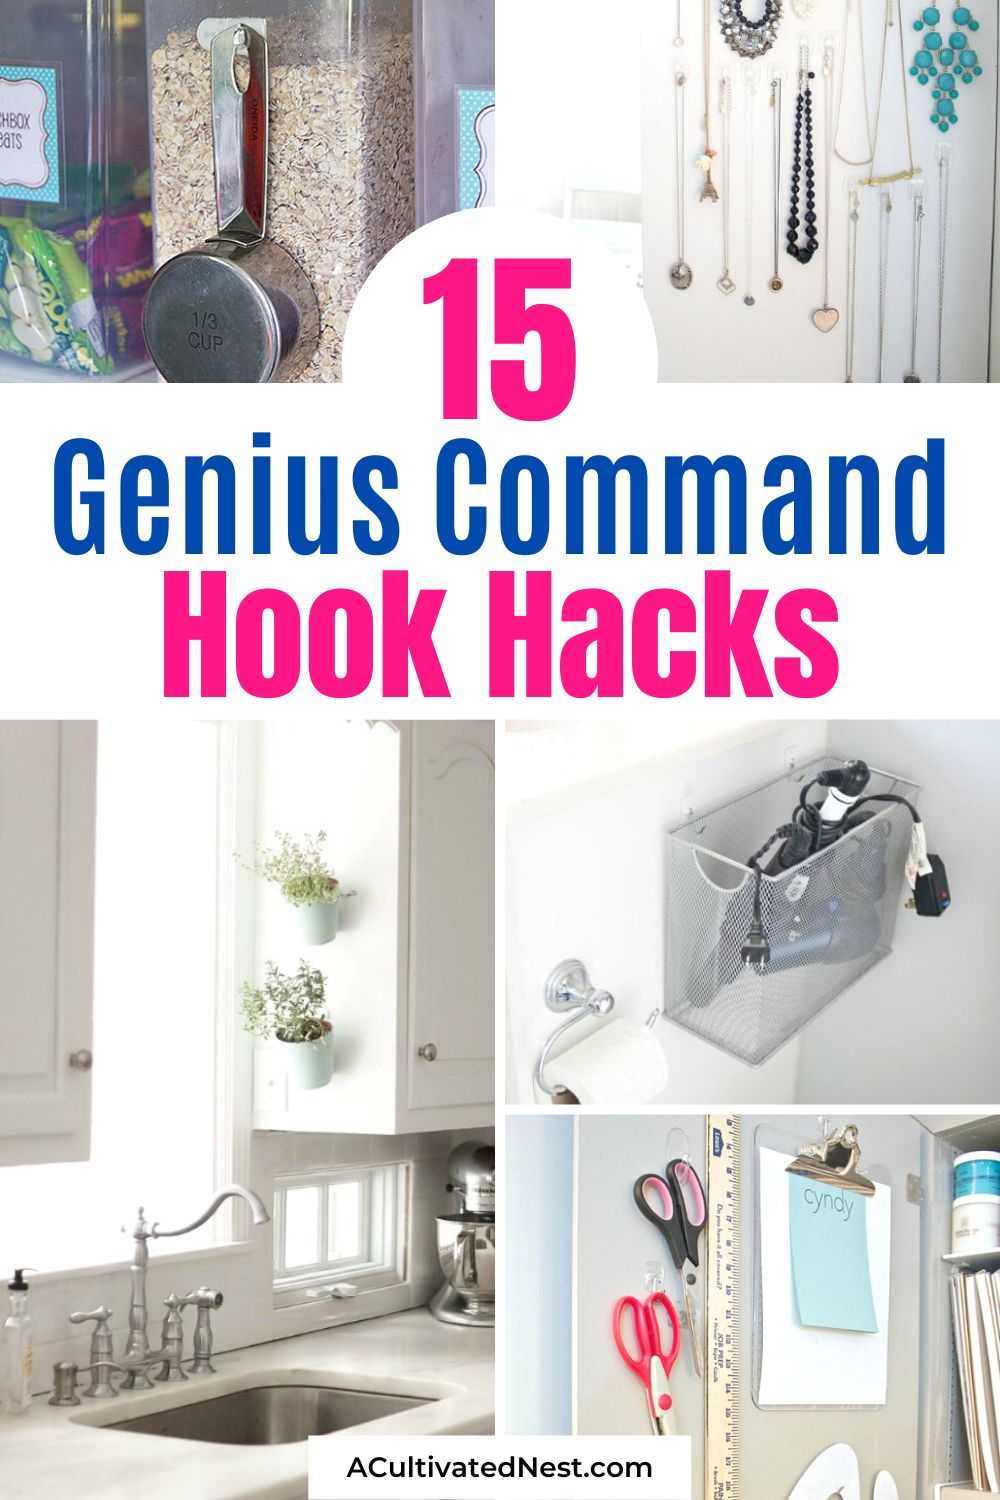 15 Mind Blowing Command Hook Hacks- Organize your home on a budget the easy way with these genius Command hook hacks! | #organizingTips #organization #homeOrganization #organize #ACultivatedNest